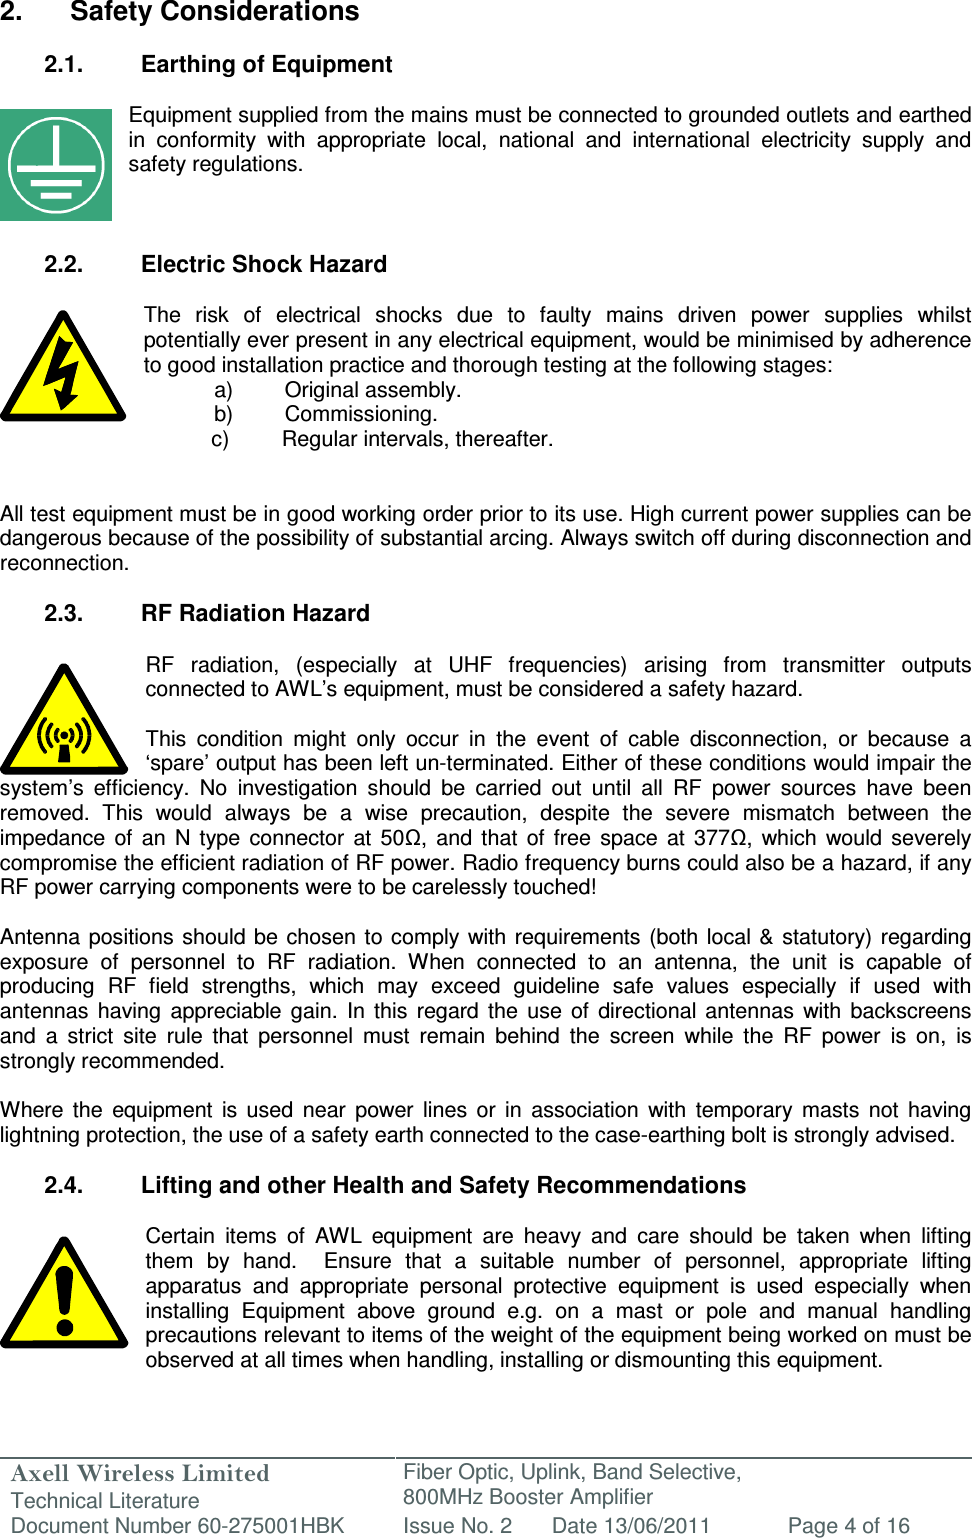 Axell Wireless Limited Technical Literature Fiber Optic, Uplink, Band Selective,  800MHz Booster Amplifier  Document Number 60-275001HBK Issue No. 2 Date 13/06/2011 Page 4 of 16   2.  Safety Considerations  2.1.  Earthing of Equipment  Equipment supplied from the mains must be connected to grounded outlets and earthed in  conformity  with  appropriate  local,  national  and  international  electricity  supply  and safety regulations.    2.2.  Electric Shock Hazard  The  risk  of  electrical  shocks  due  to  faulty  mains  driven  power  supplies  whilst potentially ever present in any electrical equipment, would be minimised by adherence to good installation practice and thorough testing at the following stages:   a)  Original assembly.   b)  Commissioning.       c)  Regular intervals, thereafter.   All test equipment must be in good working order prior to its use. High current power supplies can be dangerous because of the possibility of substantial arcing. Always switch off during disconnection and reconnection.  2.3.  RF Radiation Hazard  RF  radiation,  (especially  at  UHF  frequencies)  arising  from  transmitter  outputs connected to AWL’s equipment, must be considered a safety hazard.  This  condition  might  only  occur  in  the  event  of  cable  disconnection,  or  because  a ‘spare’ output has been left un-terminated. Either of these conditions would impair the system’s  efficiency.  No  investigation  should  be  carried  out  until  all  RF  power  sources  have  been removed.  This  would  always  be  a  wise  precaution,  despite  the  severe  mismatch  between  the impedance  of  an  N  type  connector  at  50Ω,  and  that  of  free  space  at  377Ω,  which  would  severely compromise the efficient radiation of RF power. Radio frequency burns could also be a hazard, if any RF power carrying components were to be carelessly touched!  Antenna  positions should be  chosen  to comply with  requirements  (both local &amp; statutory) regarding exposure  of  personnel  to  RF  radiation.  When  connected  to  an  antenna,  the  unit  is  capable  of producing  RF  field  strengths,  which  may  exceed  guideline  safe  values  especially  if  used  with antennas  having  appreciable  gain.  In  this  regard  the  use  of  directional  antennas  with  backscreens and  a  strict  site  rule  that  personnel  must  remain  behind  the  screen  while  the  RF  power  is  on,  is strongly recommended.  Where  the  equipment  is  used  near  power  lines  or  in  association  with  temporary  masts  not  having lightning protection, the use of a safety earth connected to the case-earthing bolt is strongly advised.  2.4.  Lifting and other Health and Safety Recommendations  Certain  items  of  AWL  equipment  are  heavy  and  care  should  be  taken  when  lifting them  by  hand.    Ensure  that  a  suitable  number  of  personnel,  appropriate  lifting apparatus  and  appropriate  personal  protective  equipment  is  used  especially  when installing  Equipment  above  ground  e.g.  on  a  mast  or  pole  and  manual  handling precautions relevant to items of the weight of the equipment being worked on must be observed at all times when handling, installing or dismounting this equipment.   